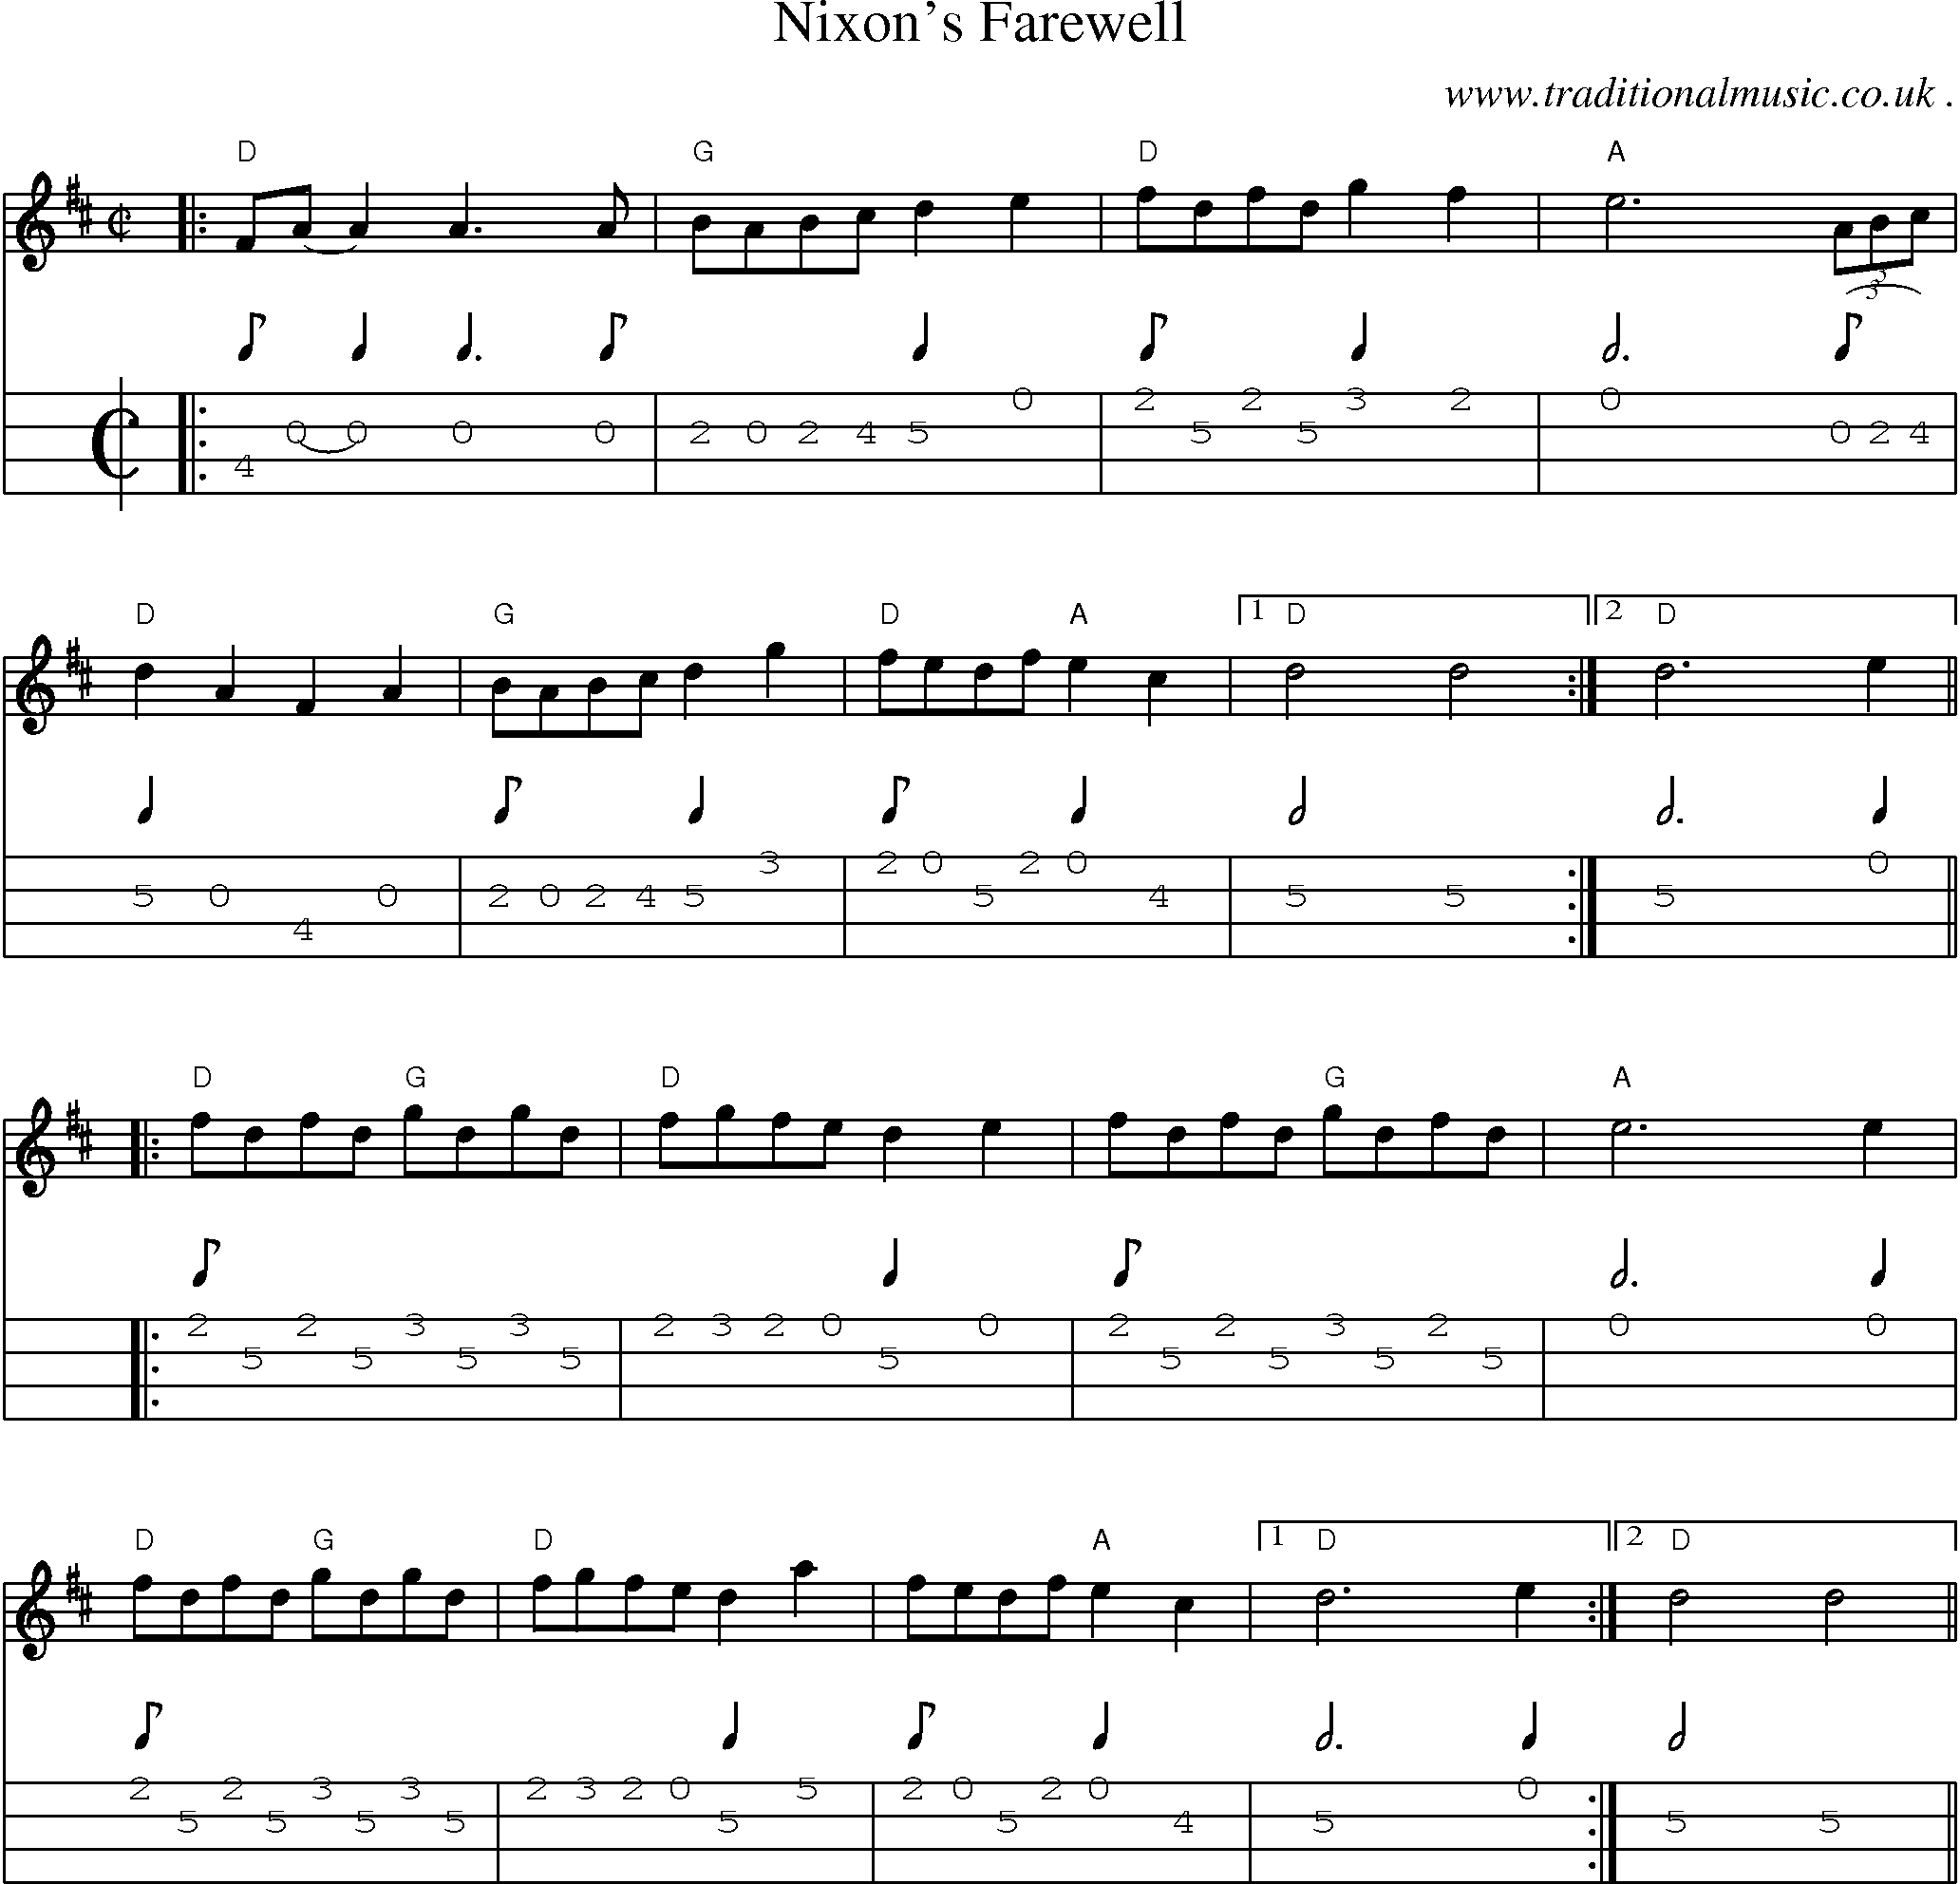 Music Score and Guitar Tabs for Nixons Farewell